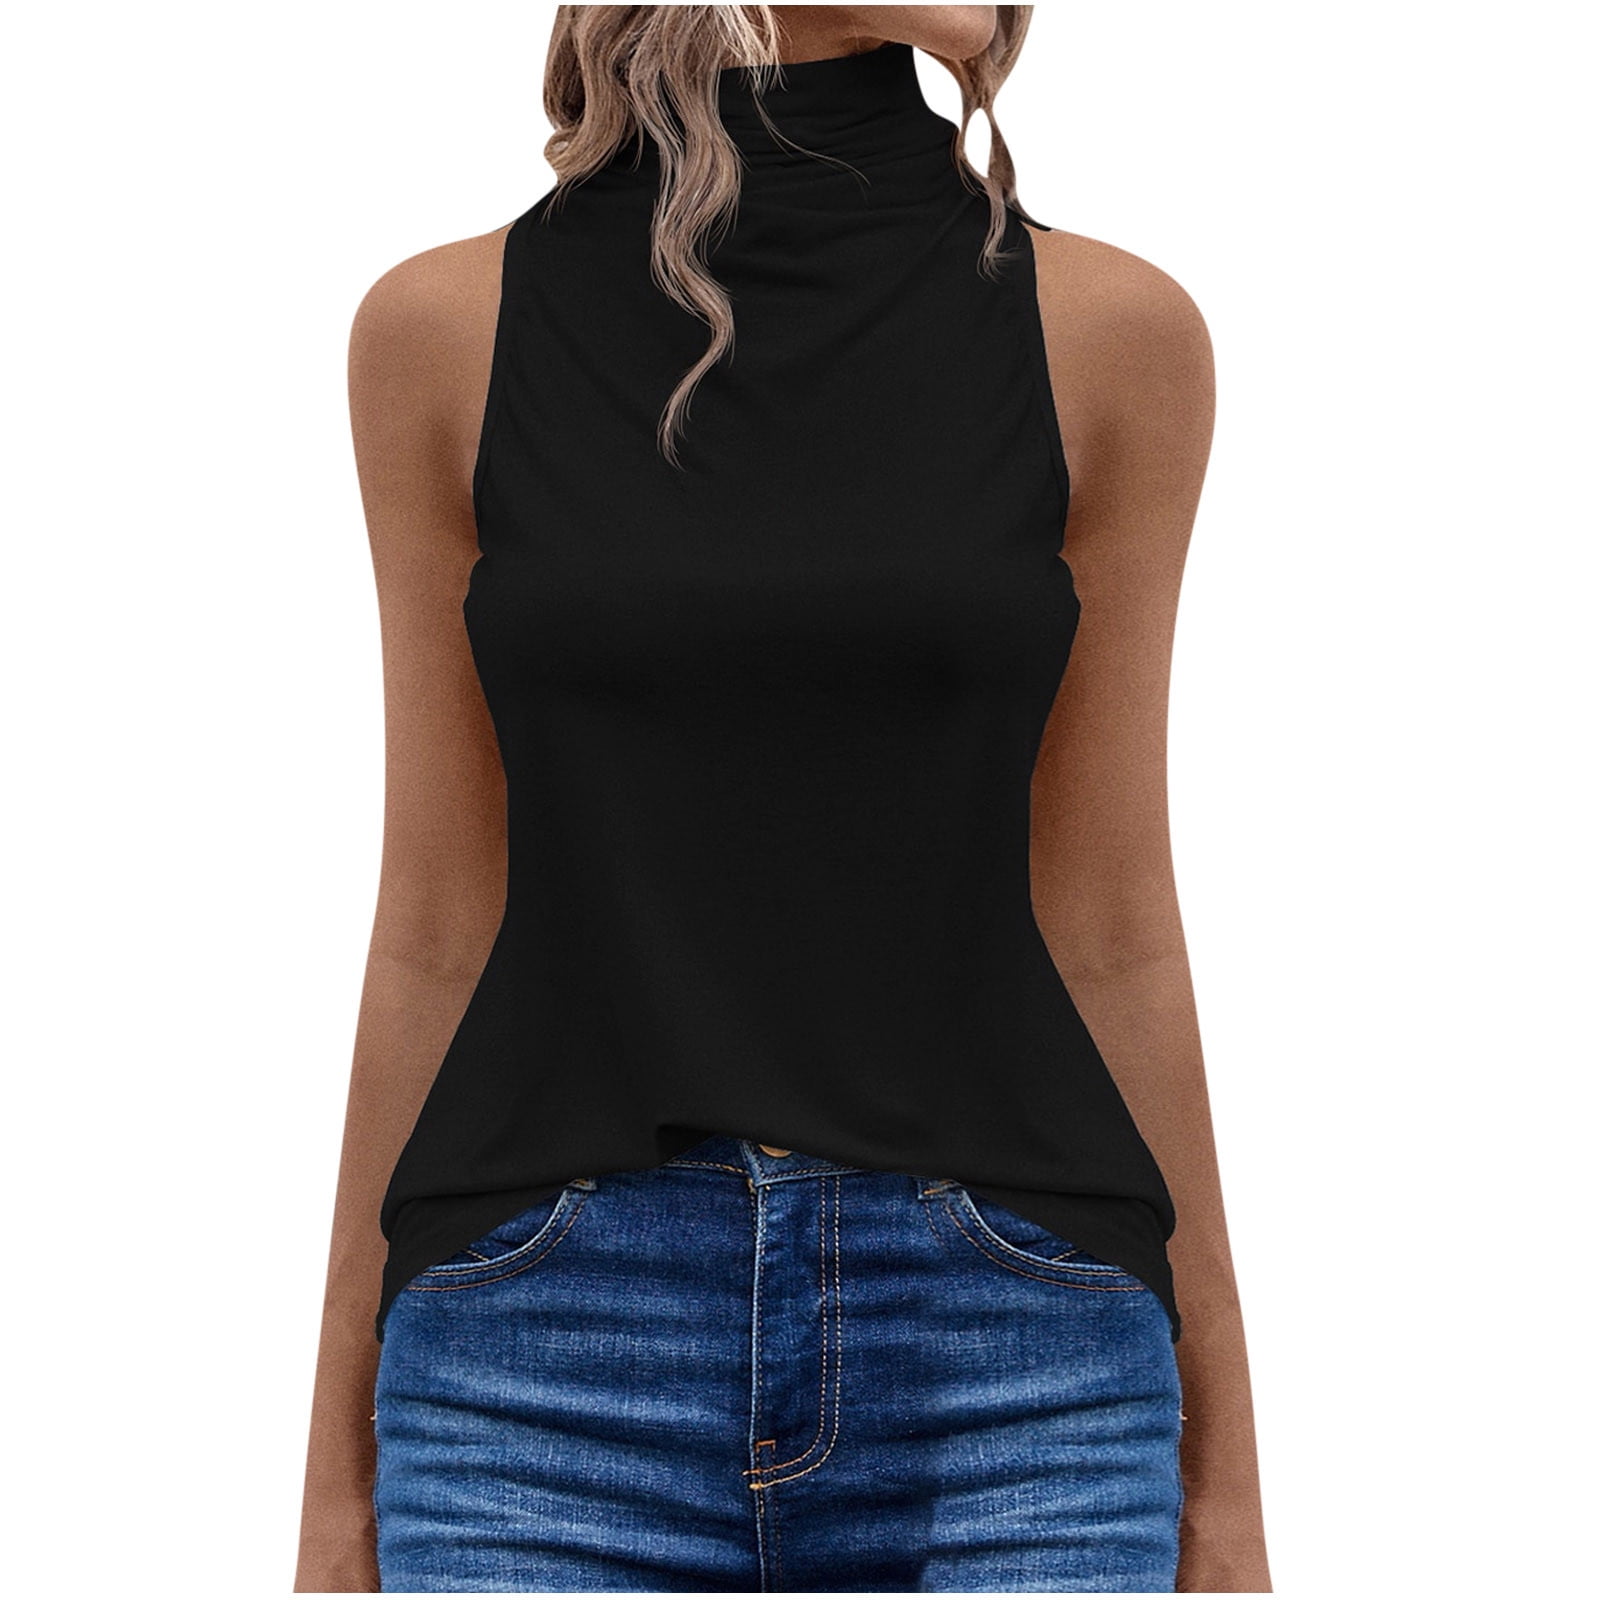 Usmixi Tank Top for Women Plain Half High Neck Sleeveless T Shirts Summer  Slim Fit Lightweight Ruched Vest Blouse Black M Up to 65% off